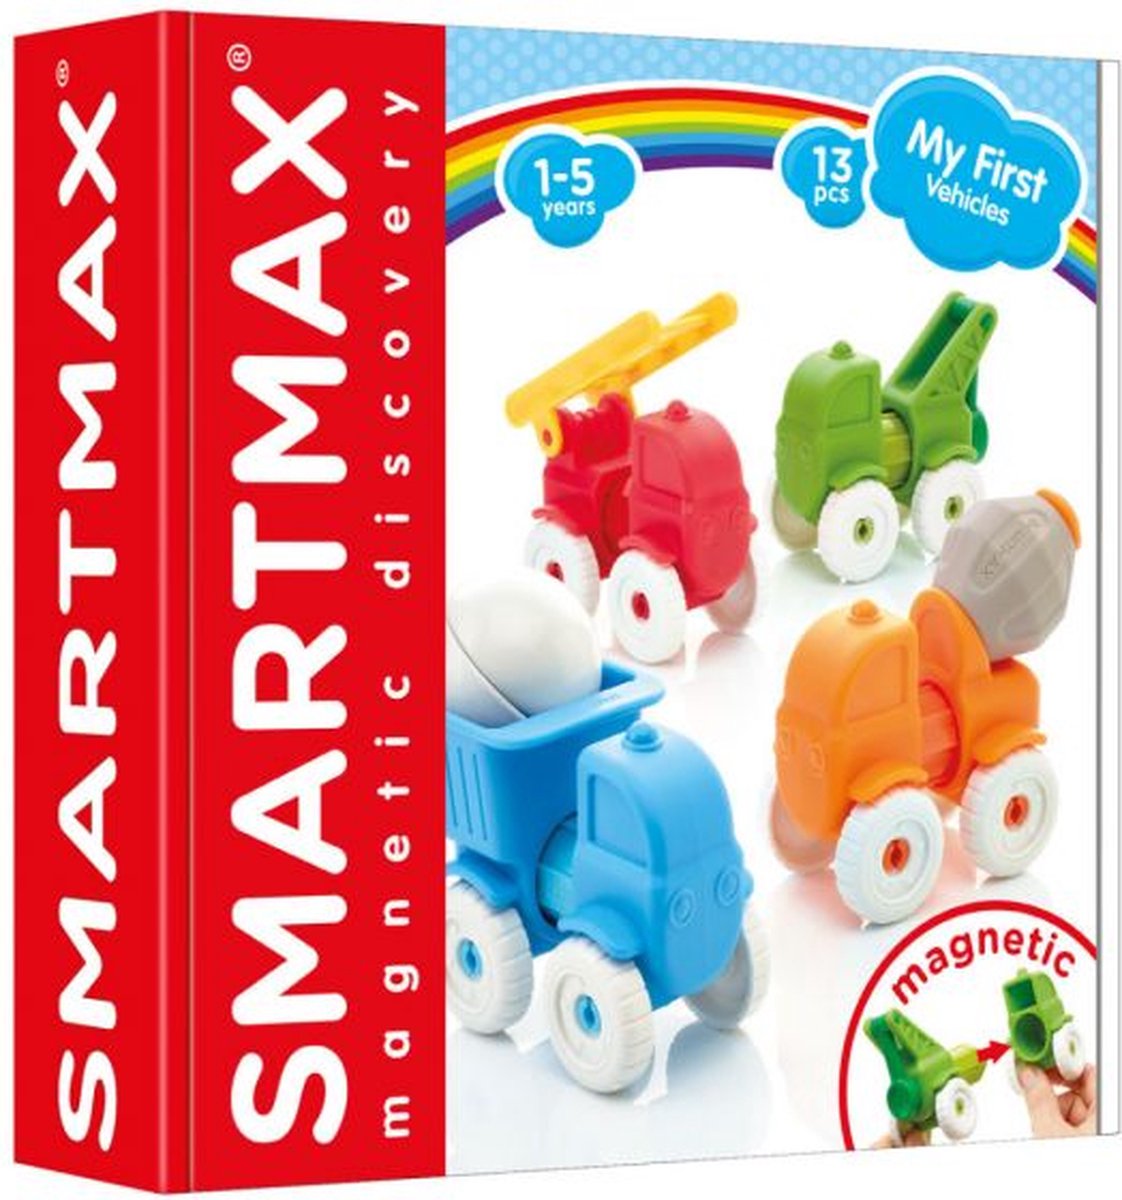 SmartMax My First - Vehicles